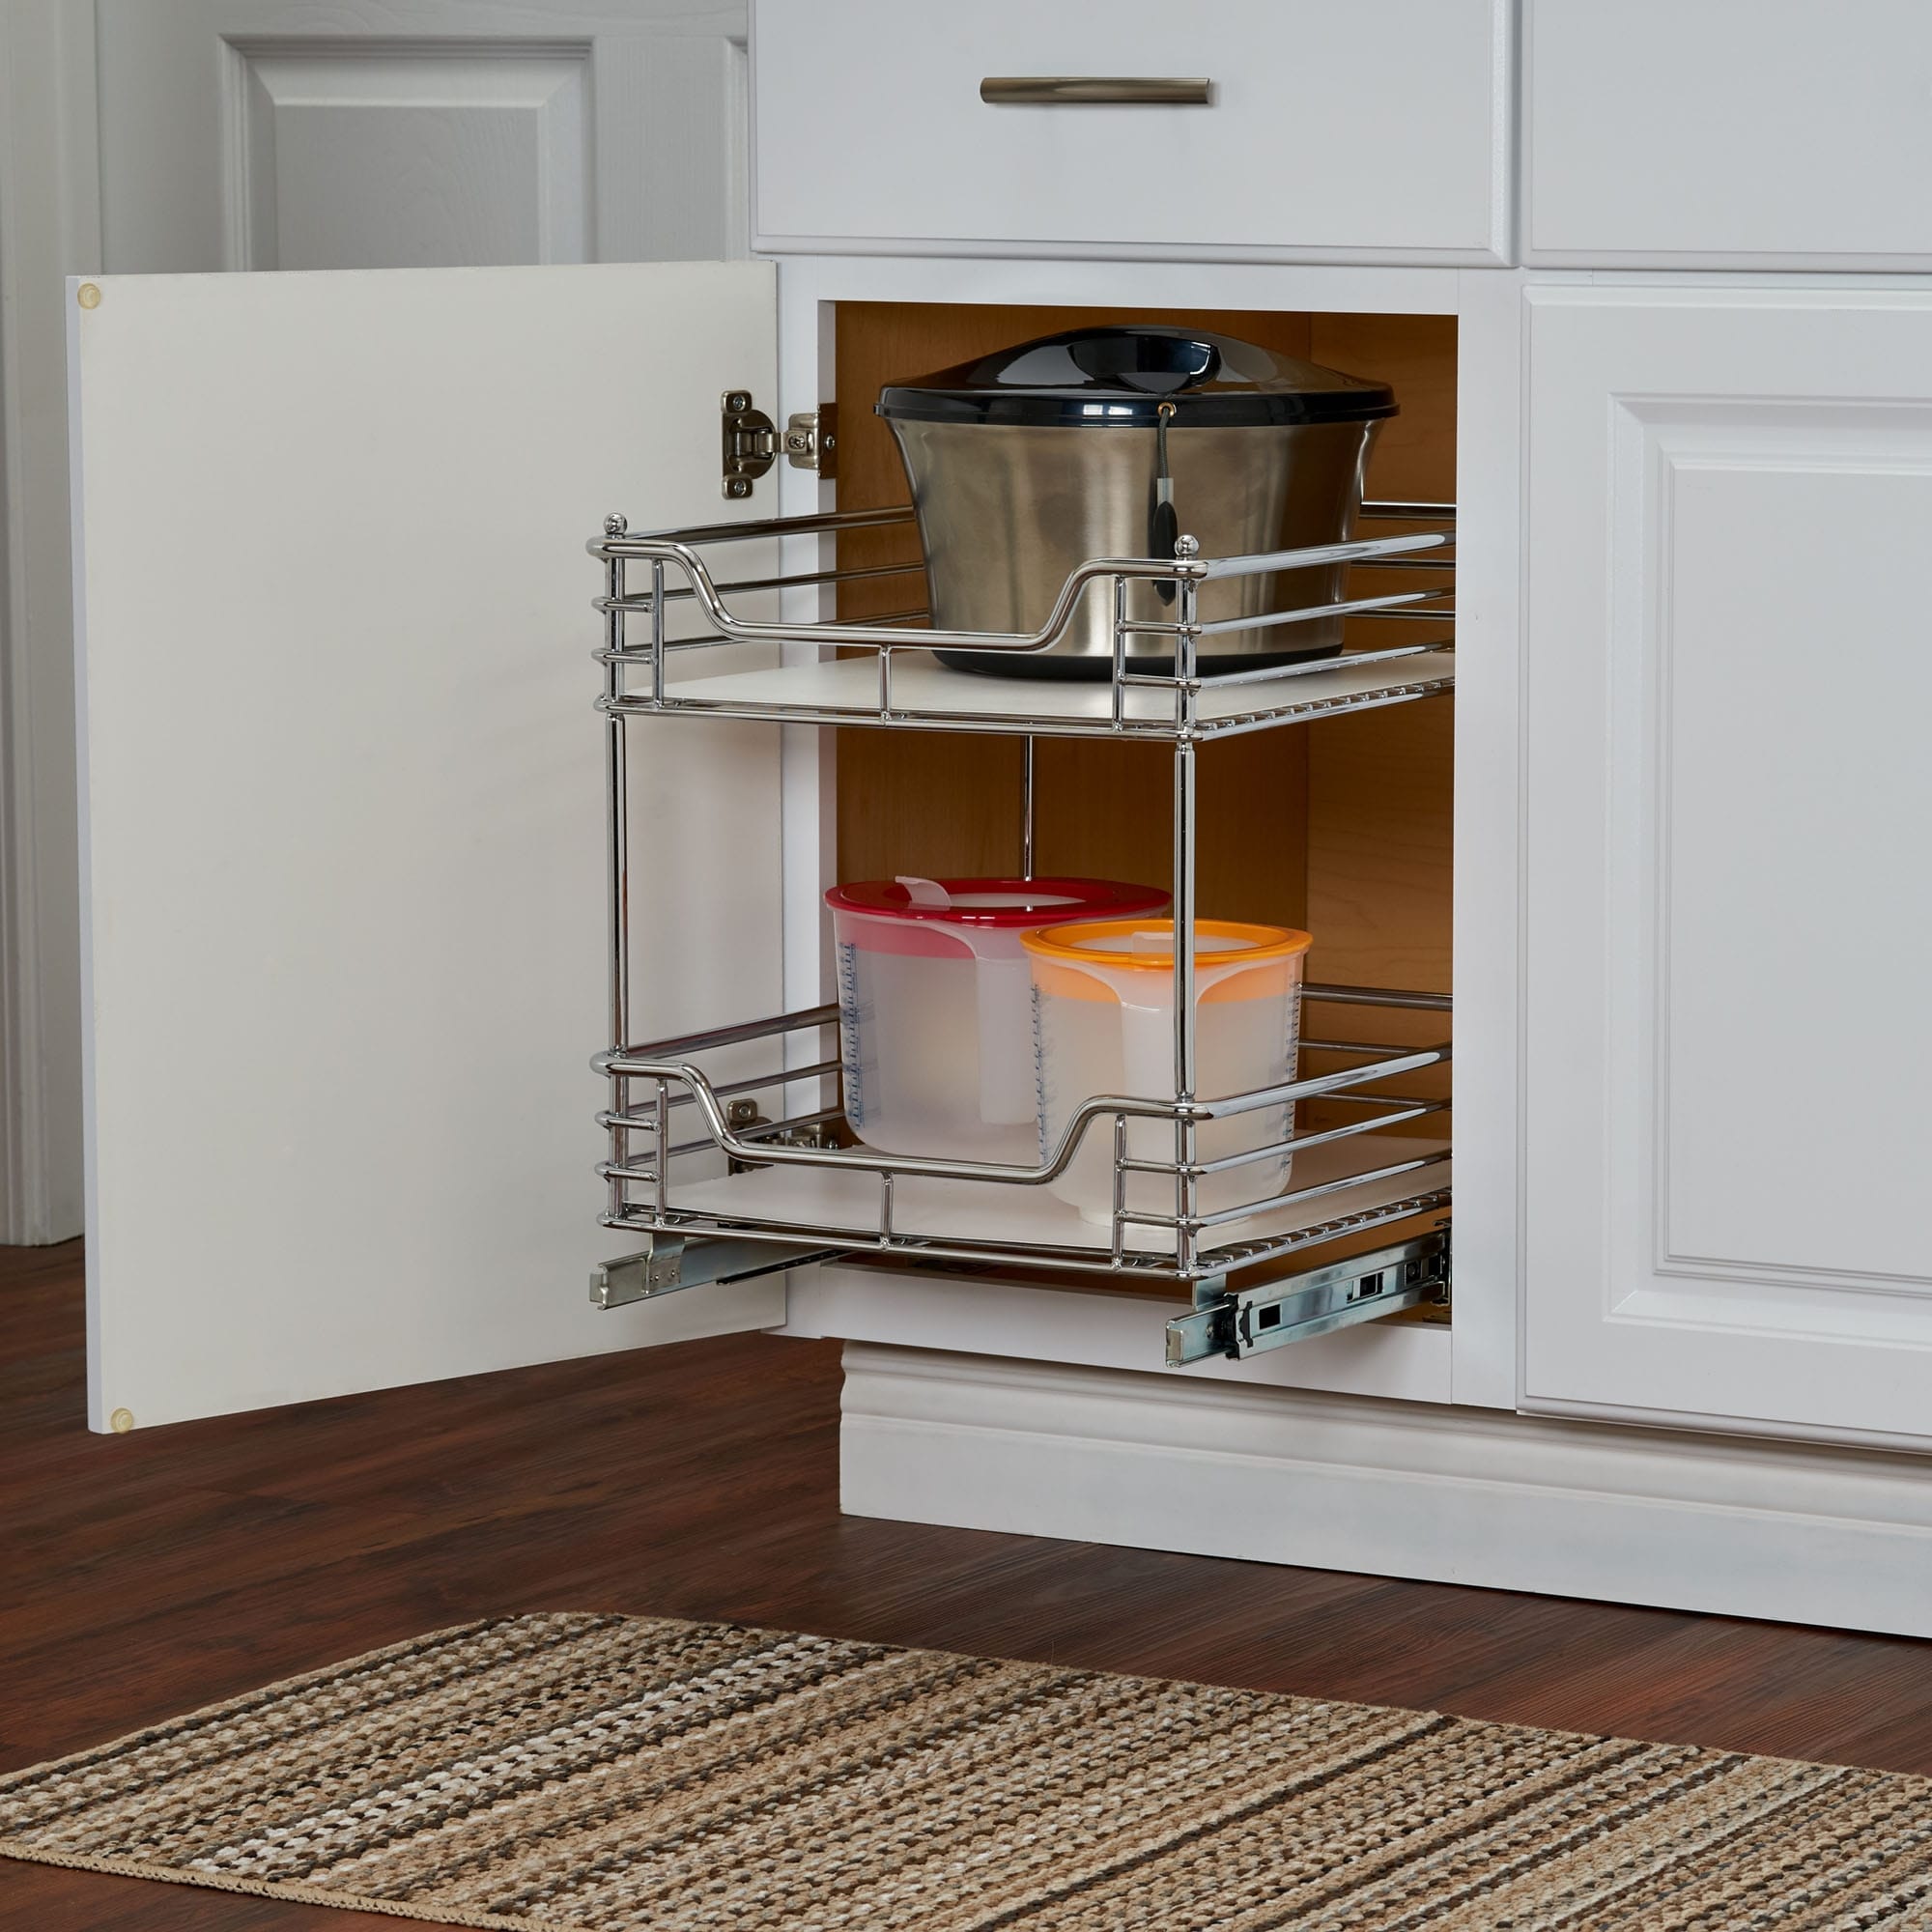 https://ak1.ostkcdn.com/images/products/is/images/direct/74574999ef0934ec0dede6699de054e00887a1df/Glidez-2-Tier-Steel-Pull-Out-Slide-Out-Storage-Organizer-with-Plastic-Liners.jpg